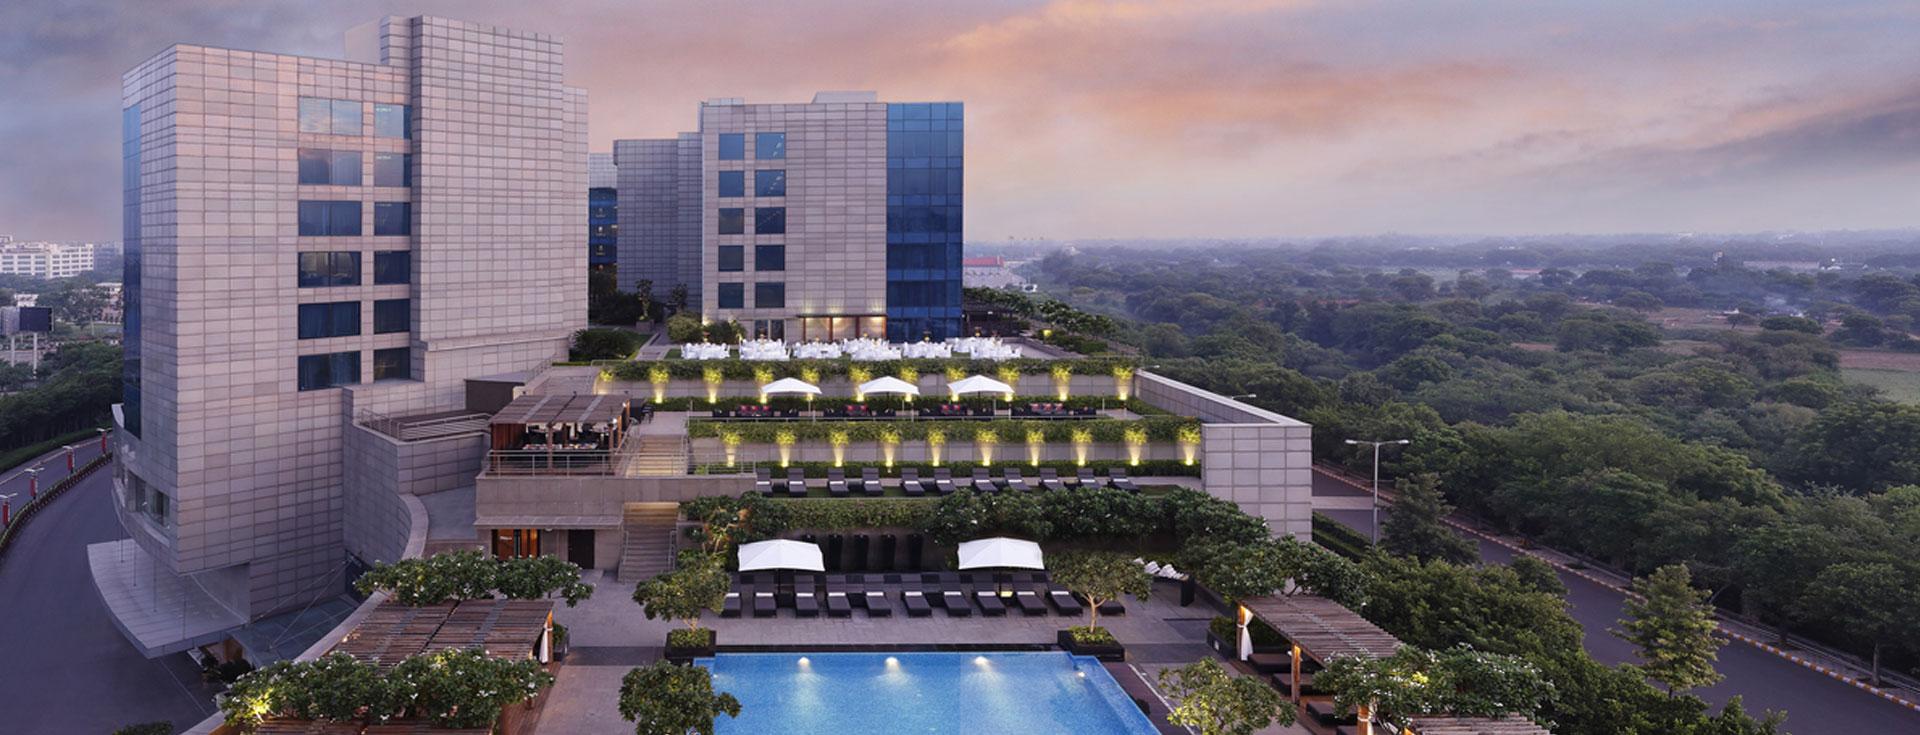 Discover the best 5 star hotel in Gurgaon